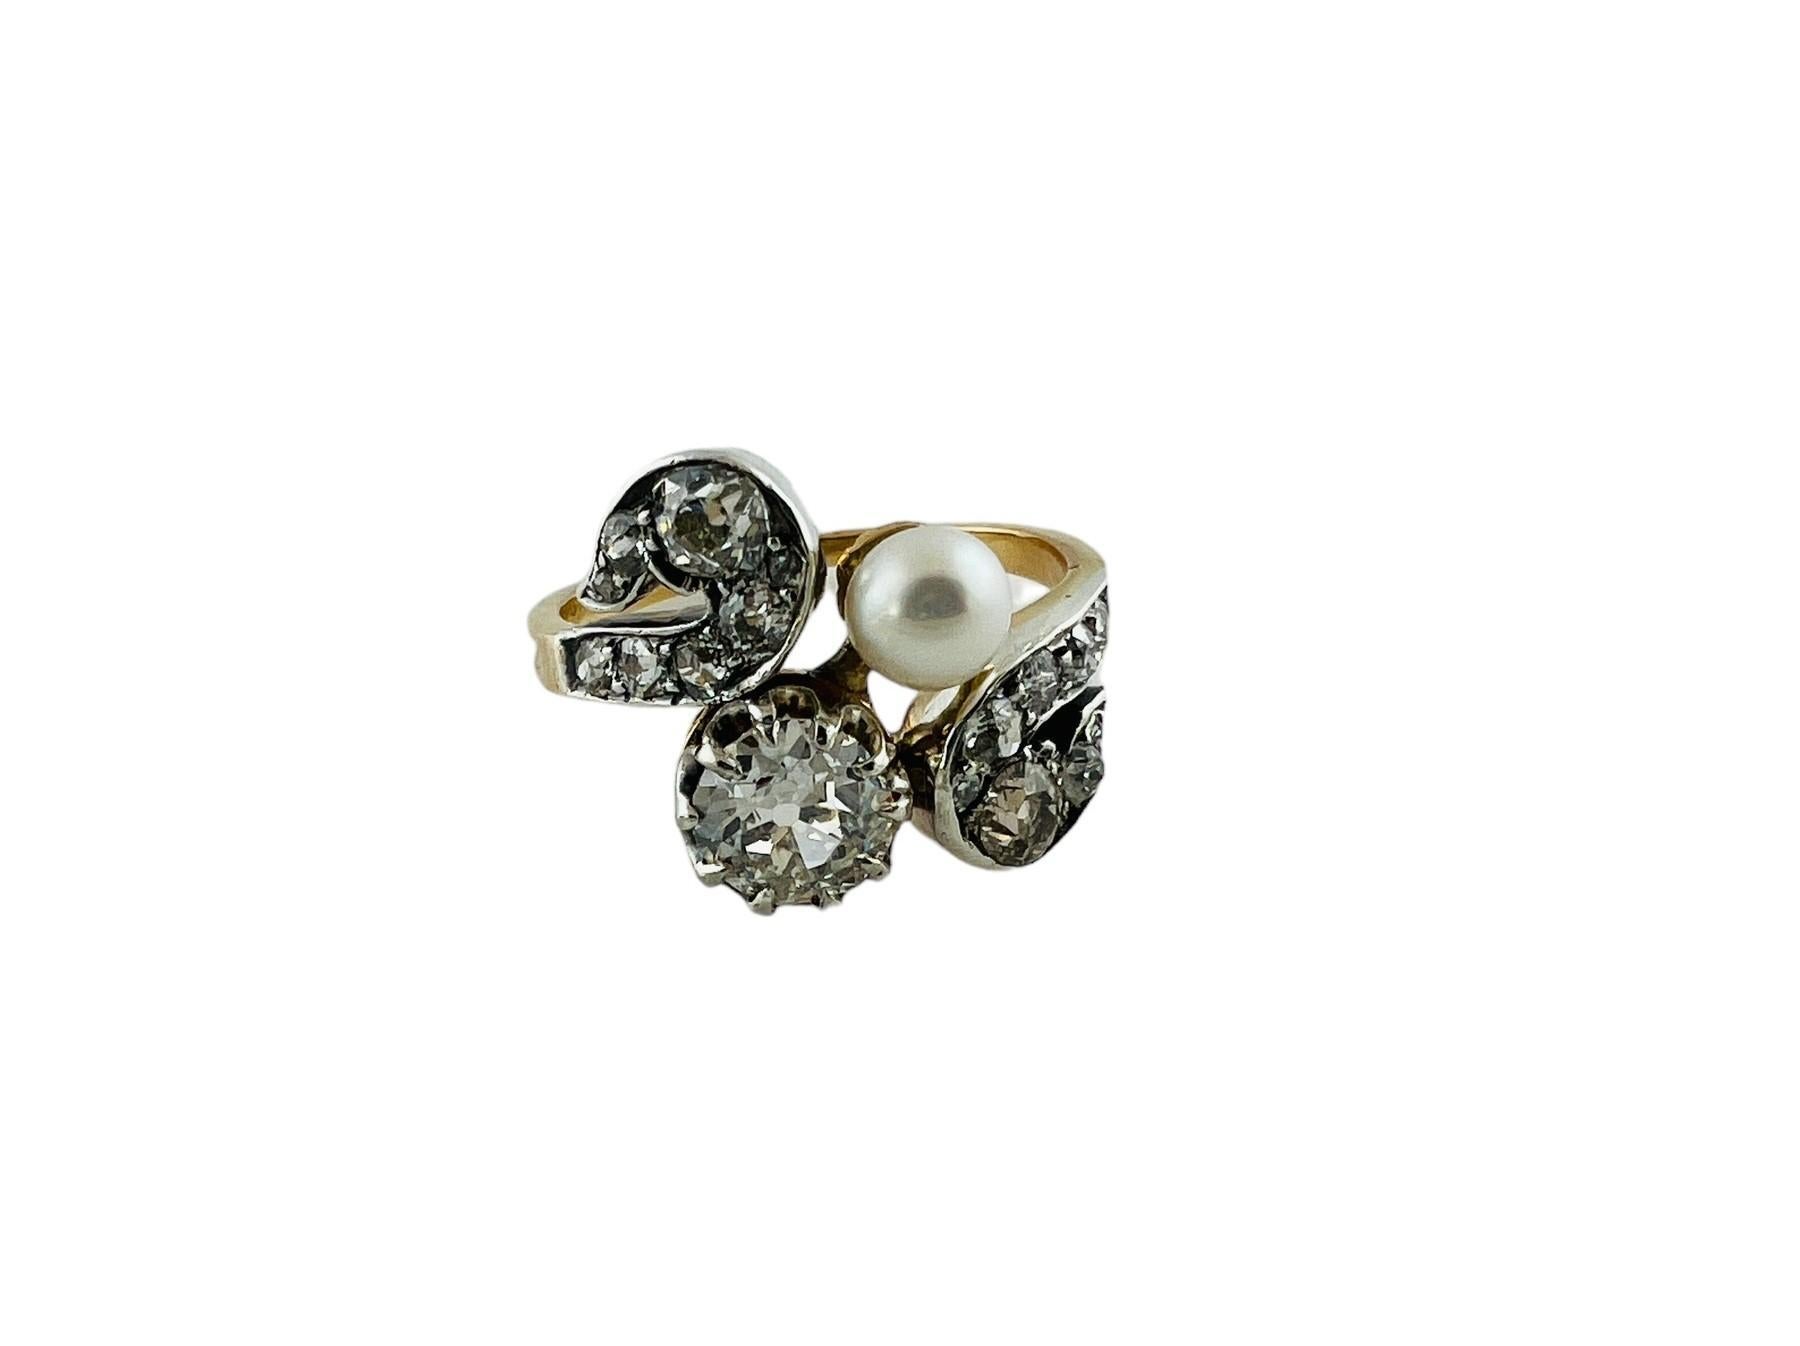 Vintage 14K Yellow and White Diamond and Pearl Ring

This gorgeous ring is set with an old mine diamond approx. 1.0 cttw

Diamond clarity: SI1

Diamond color: I

Ring is set with 16 additional old min diamonds approx. 0.80 cttw

Diamond clarity: SI1